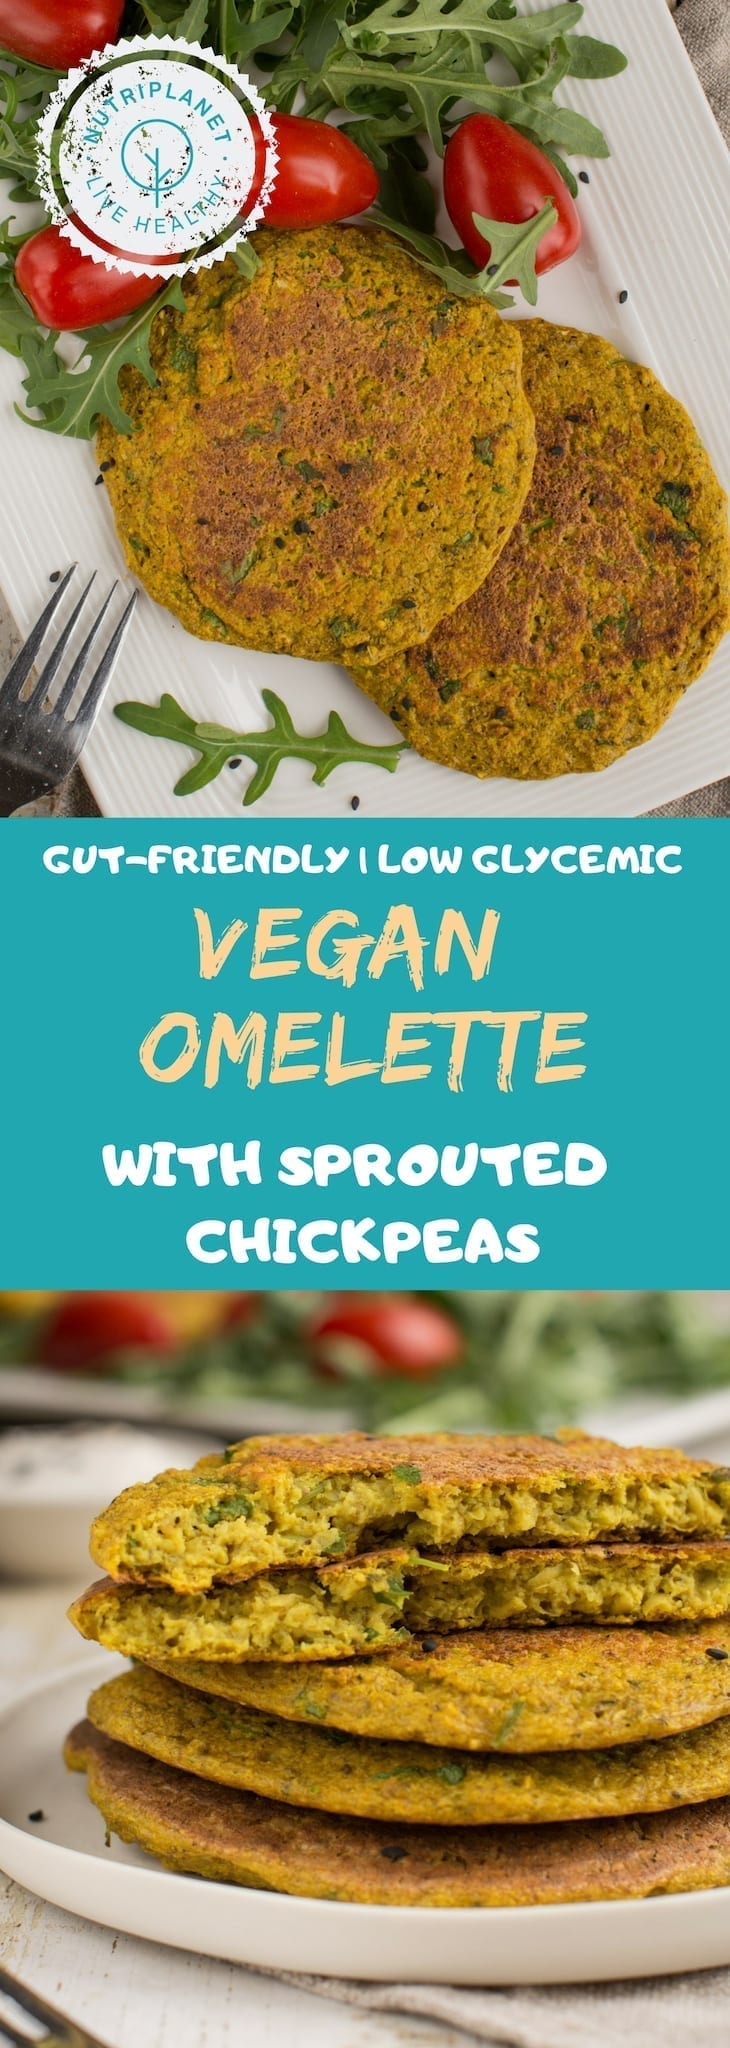 Vegan Omelette with Sprouted Chickpeas